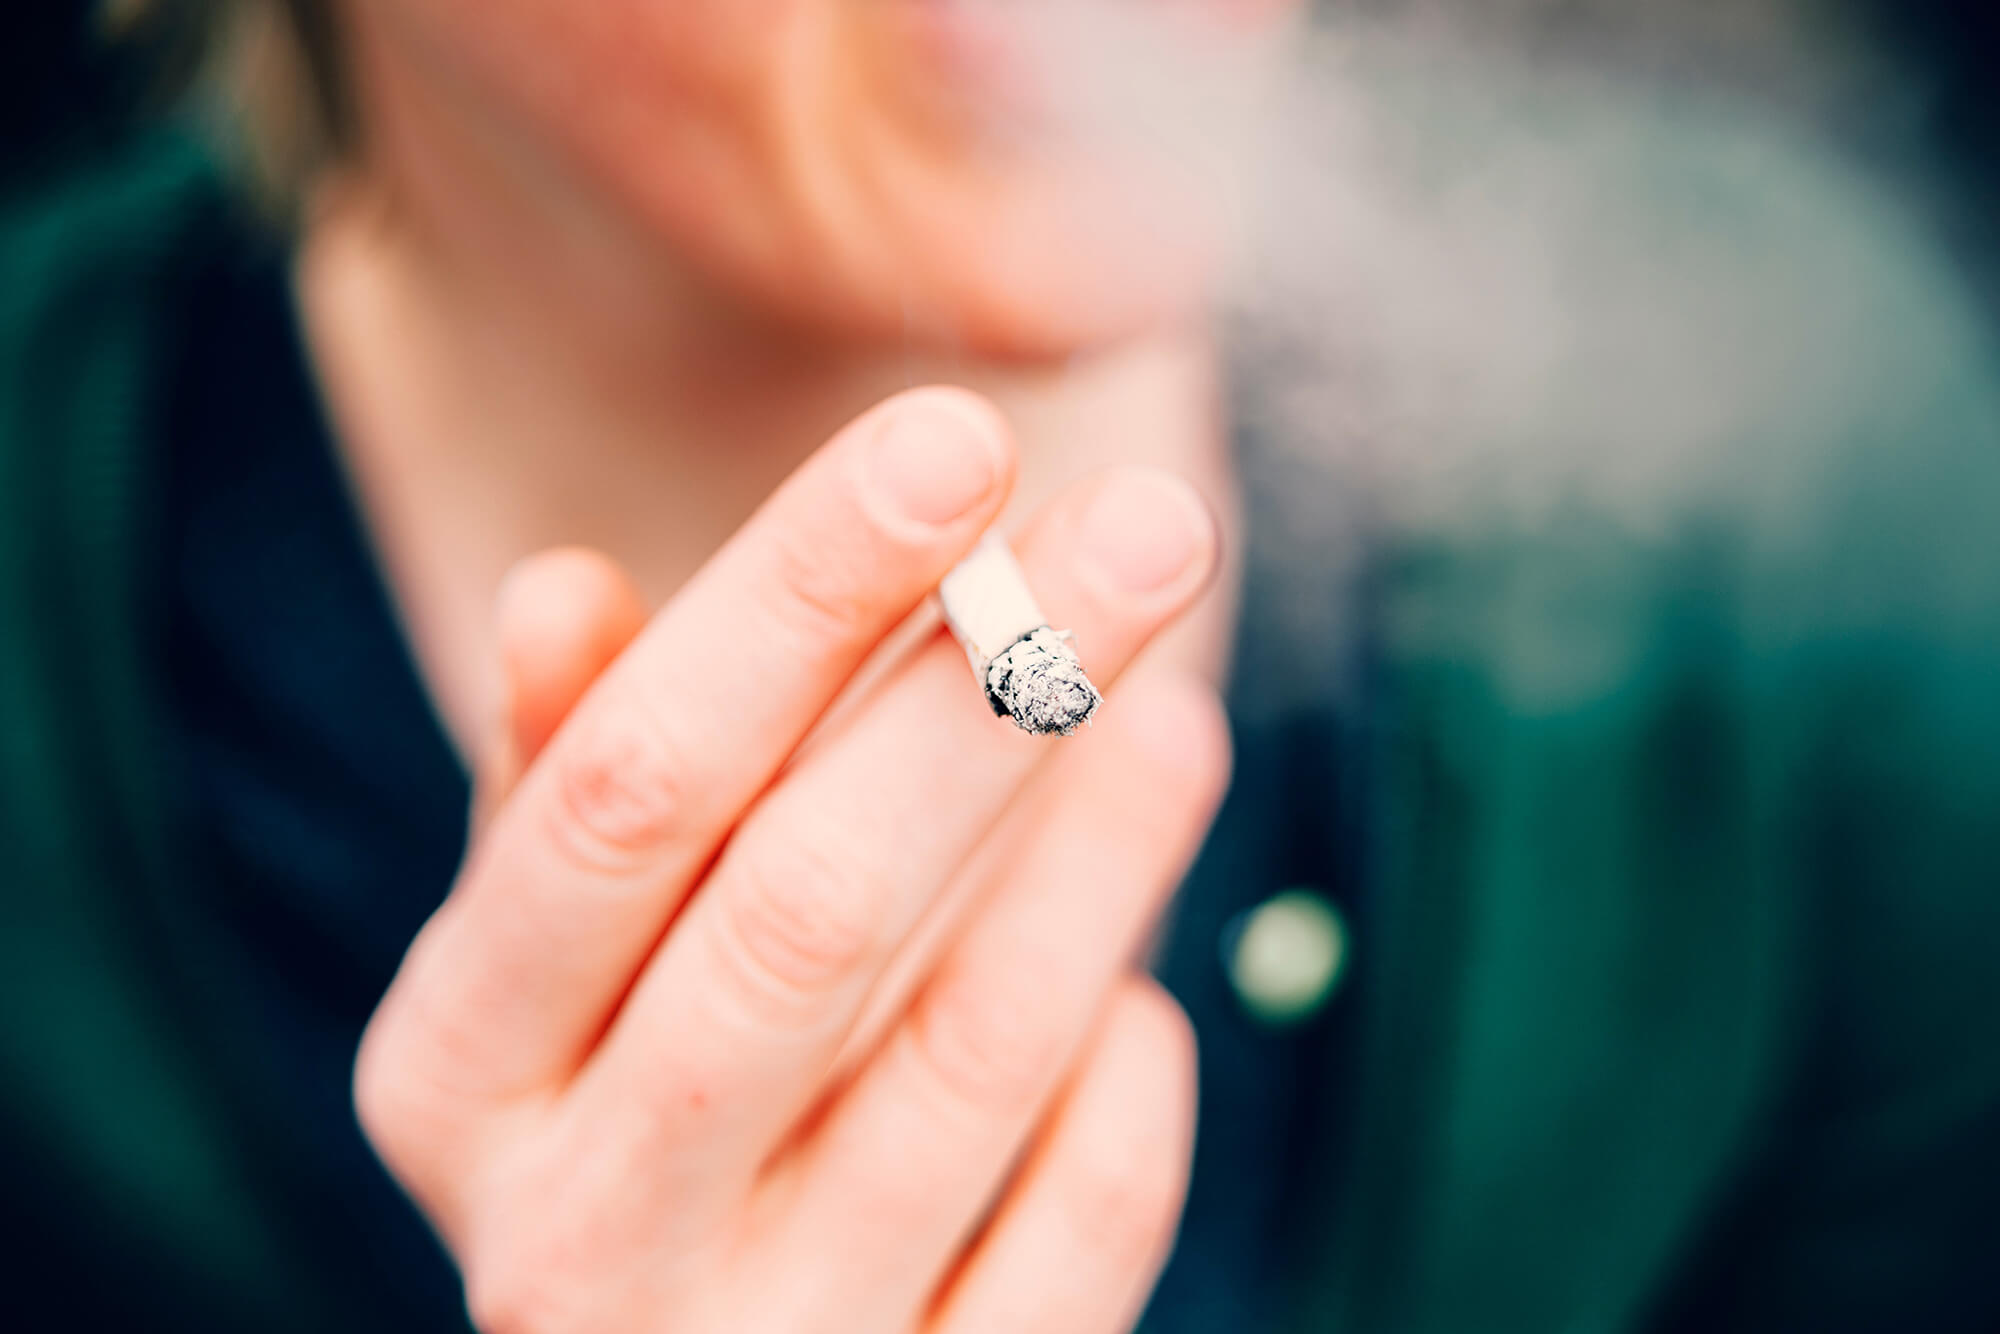 Smoking has been linked to increased risk of several cancer types.